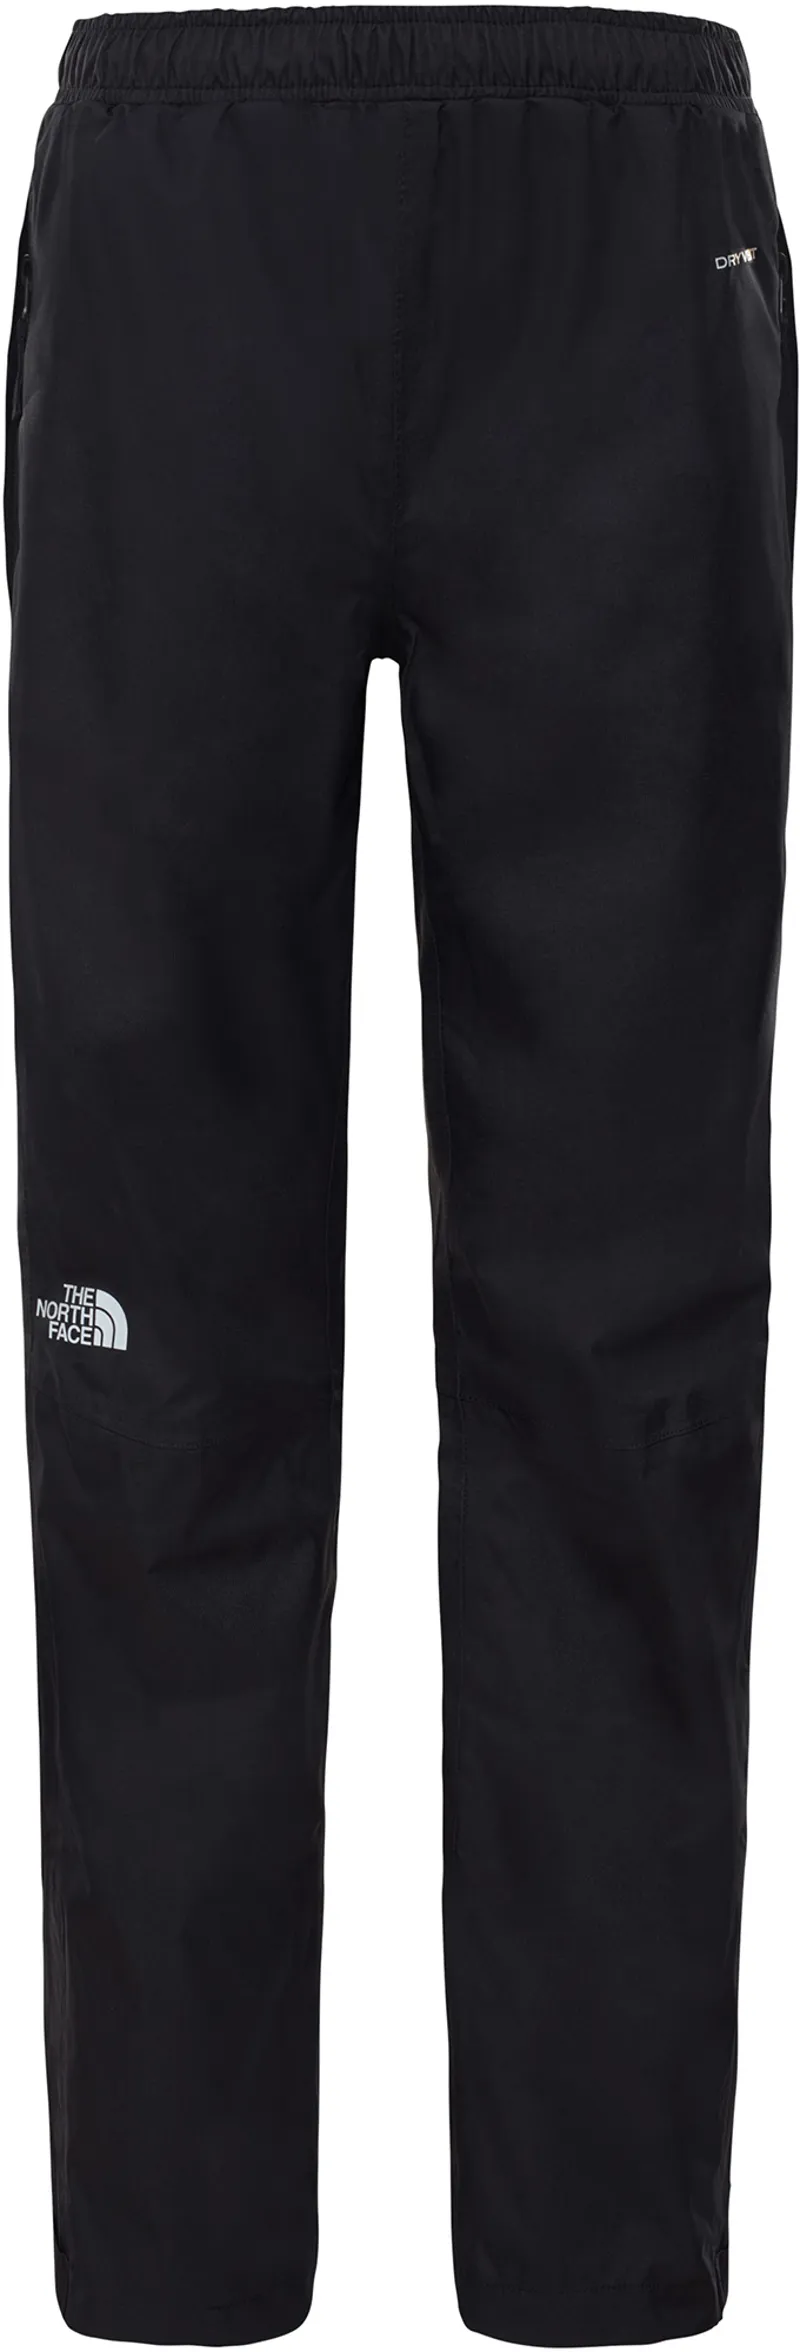 The North Face Youth Resolve Pant - Black with Reflective